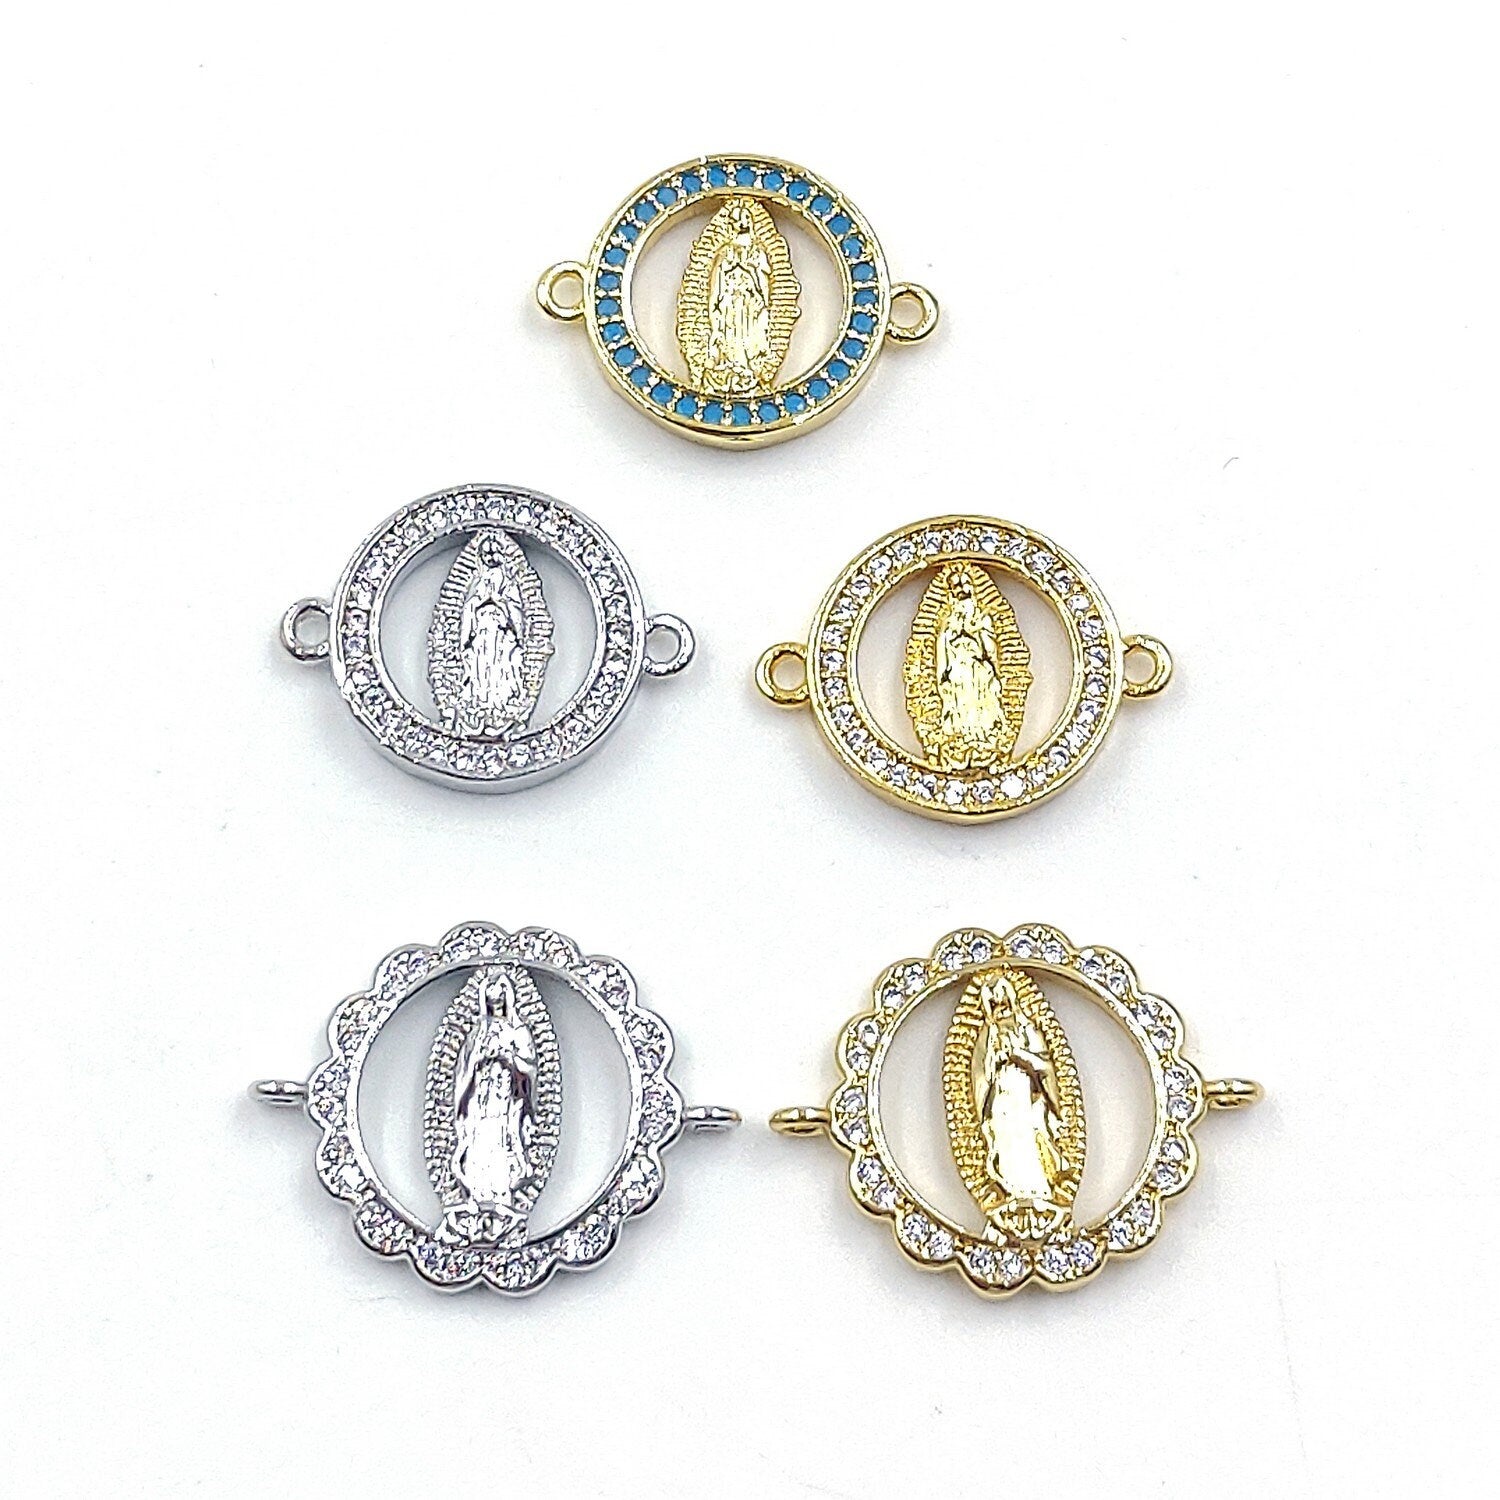 CZ Micro Gold Jesus Blessed Mother Mary Connectors, Silver Religious Blue Turquoise #493, Round Disc Bracelet Jewelry